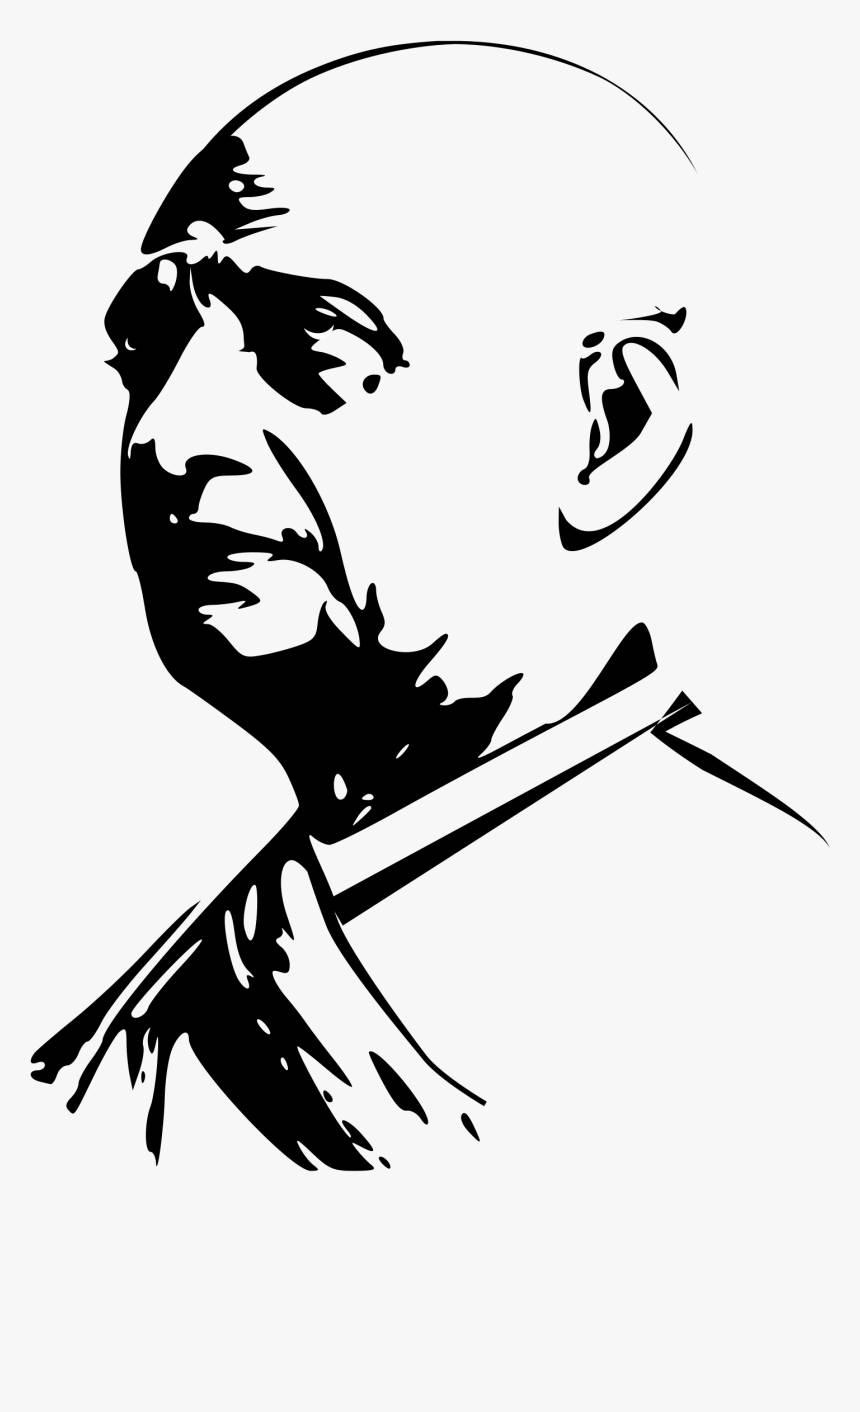 "Sardar Patel: The Icon of Unified India" Wallpaper